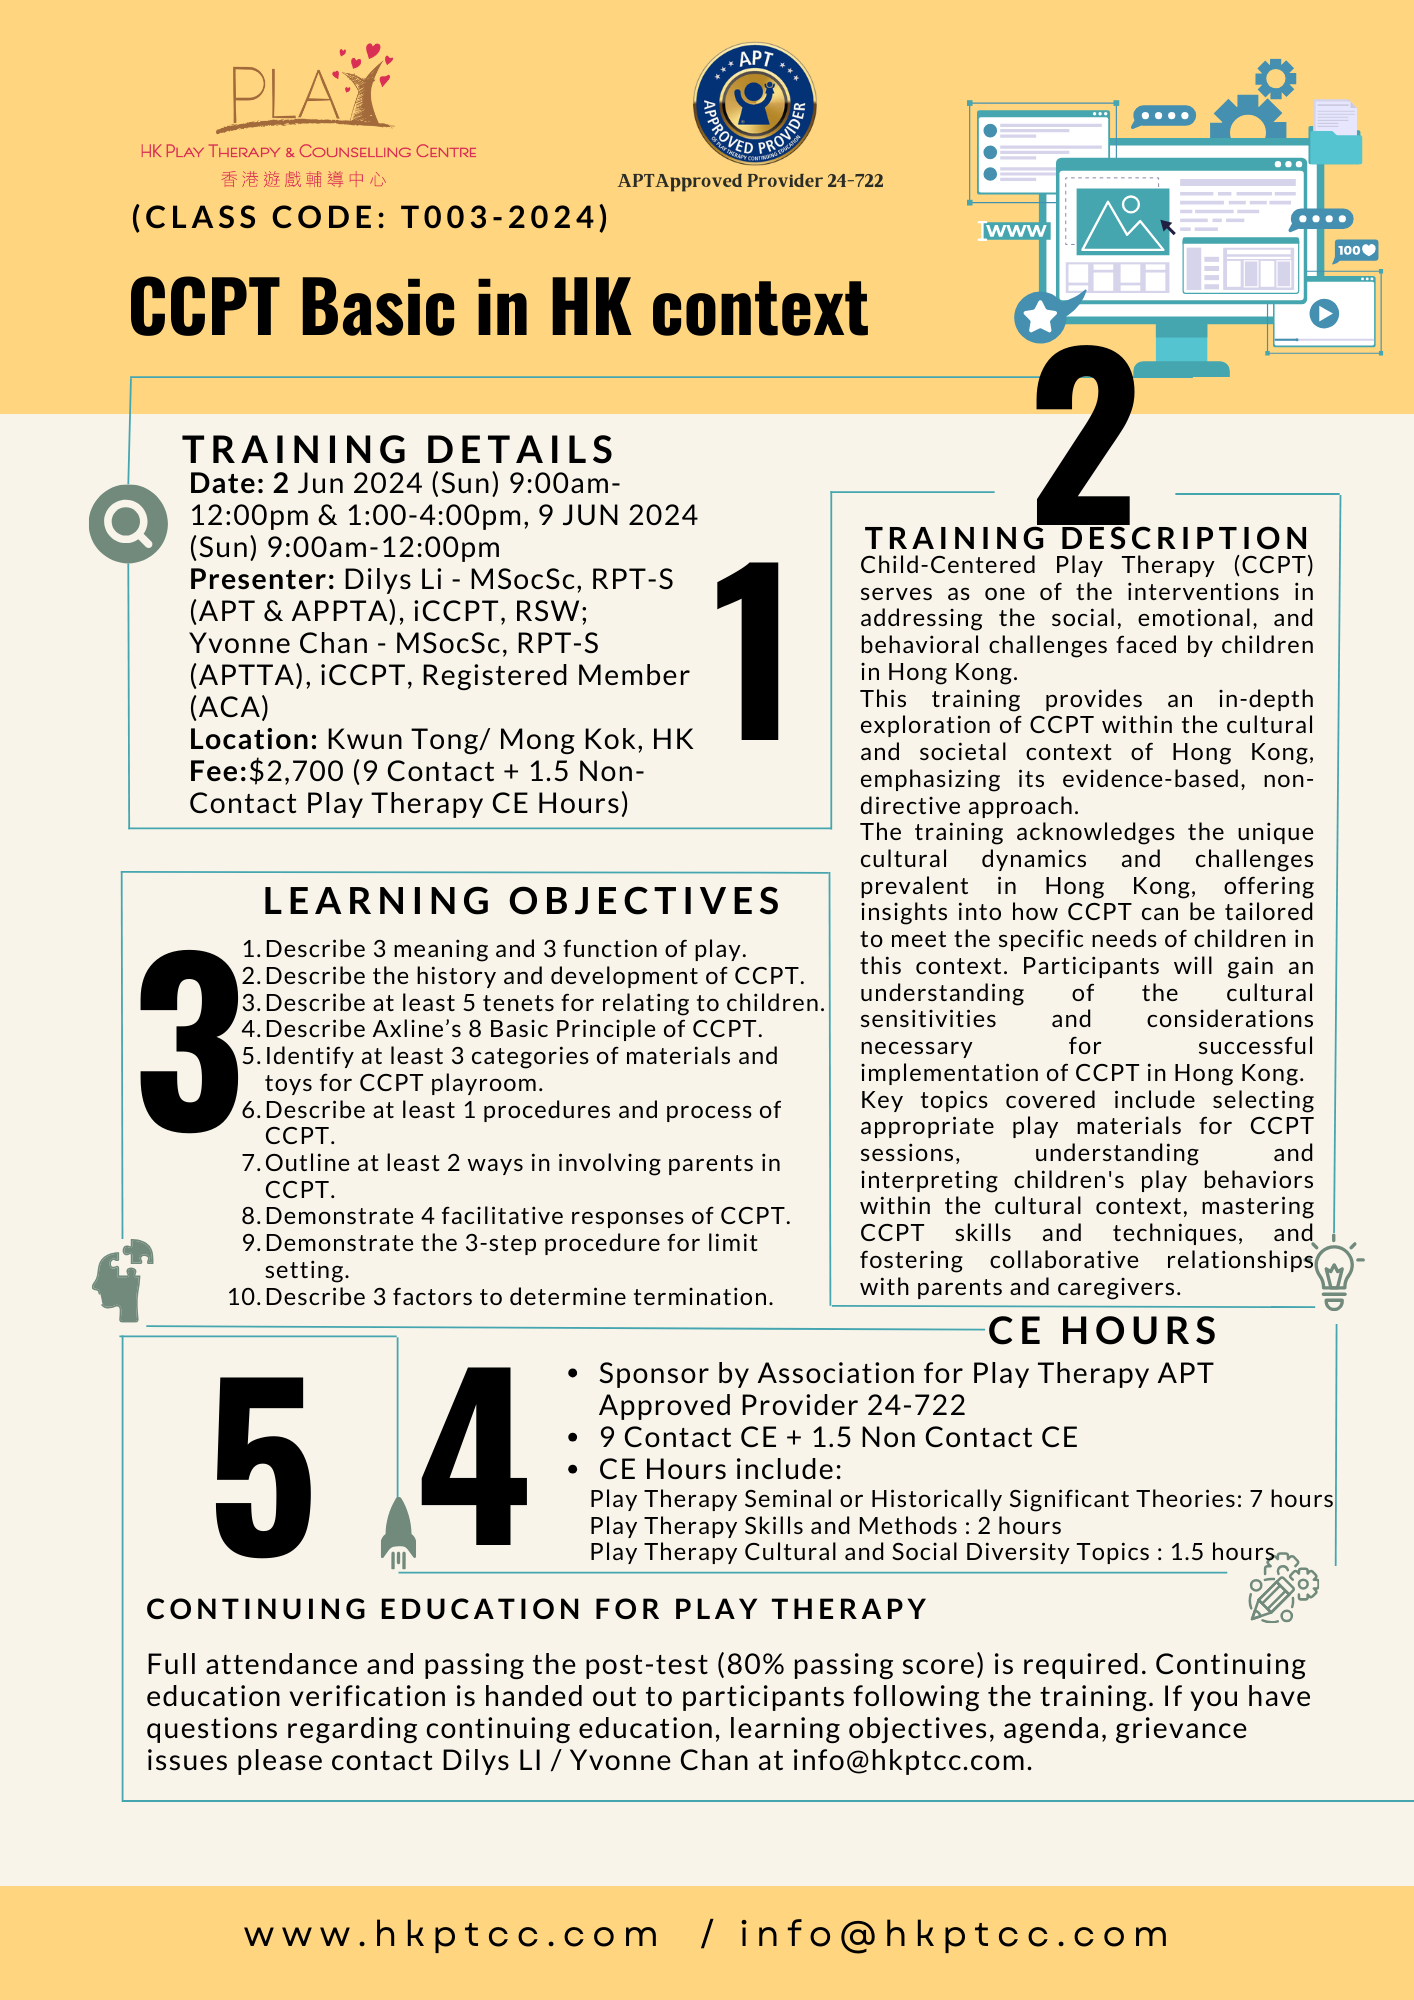 Child-Centered Play Therapy Basic in Hong Kong Context